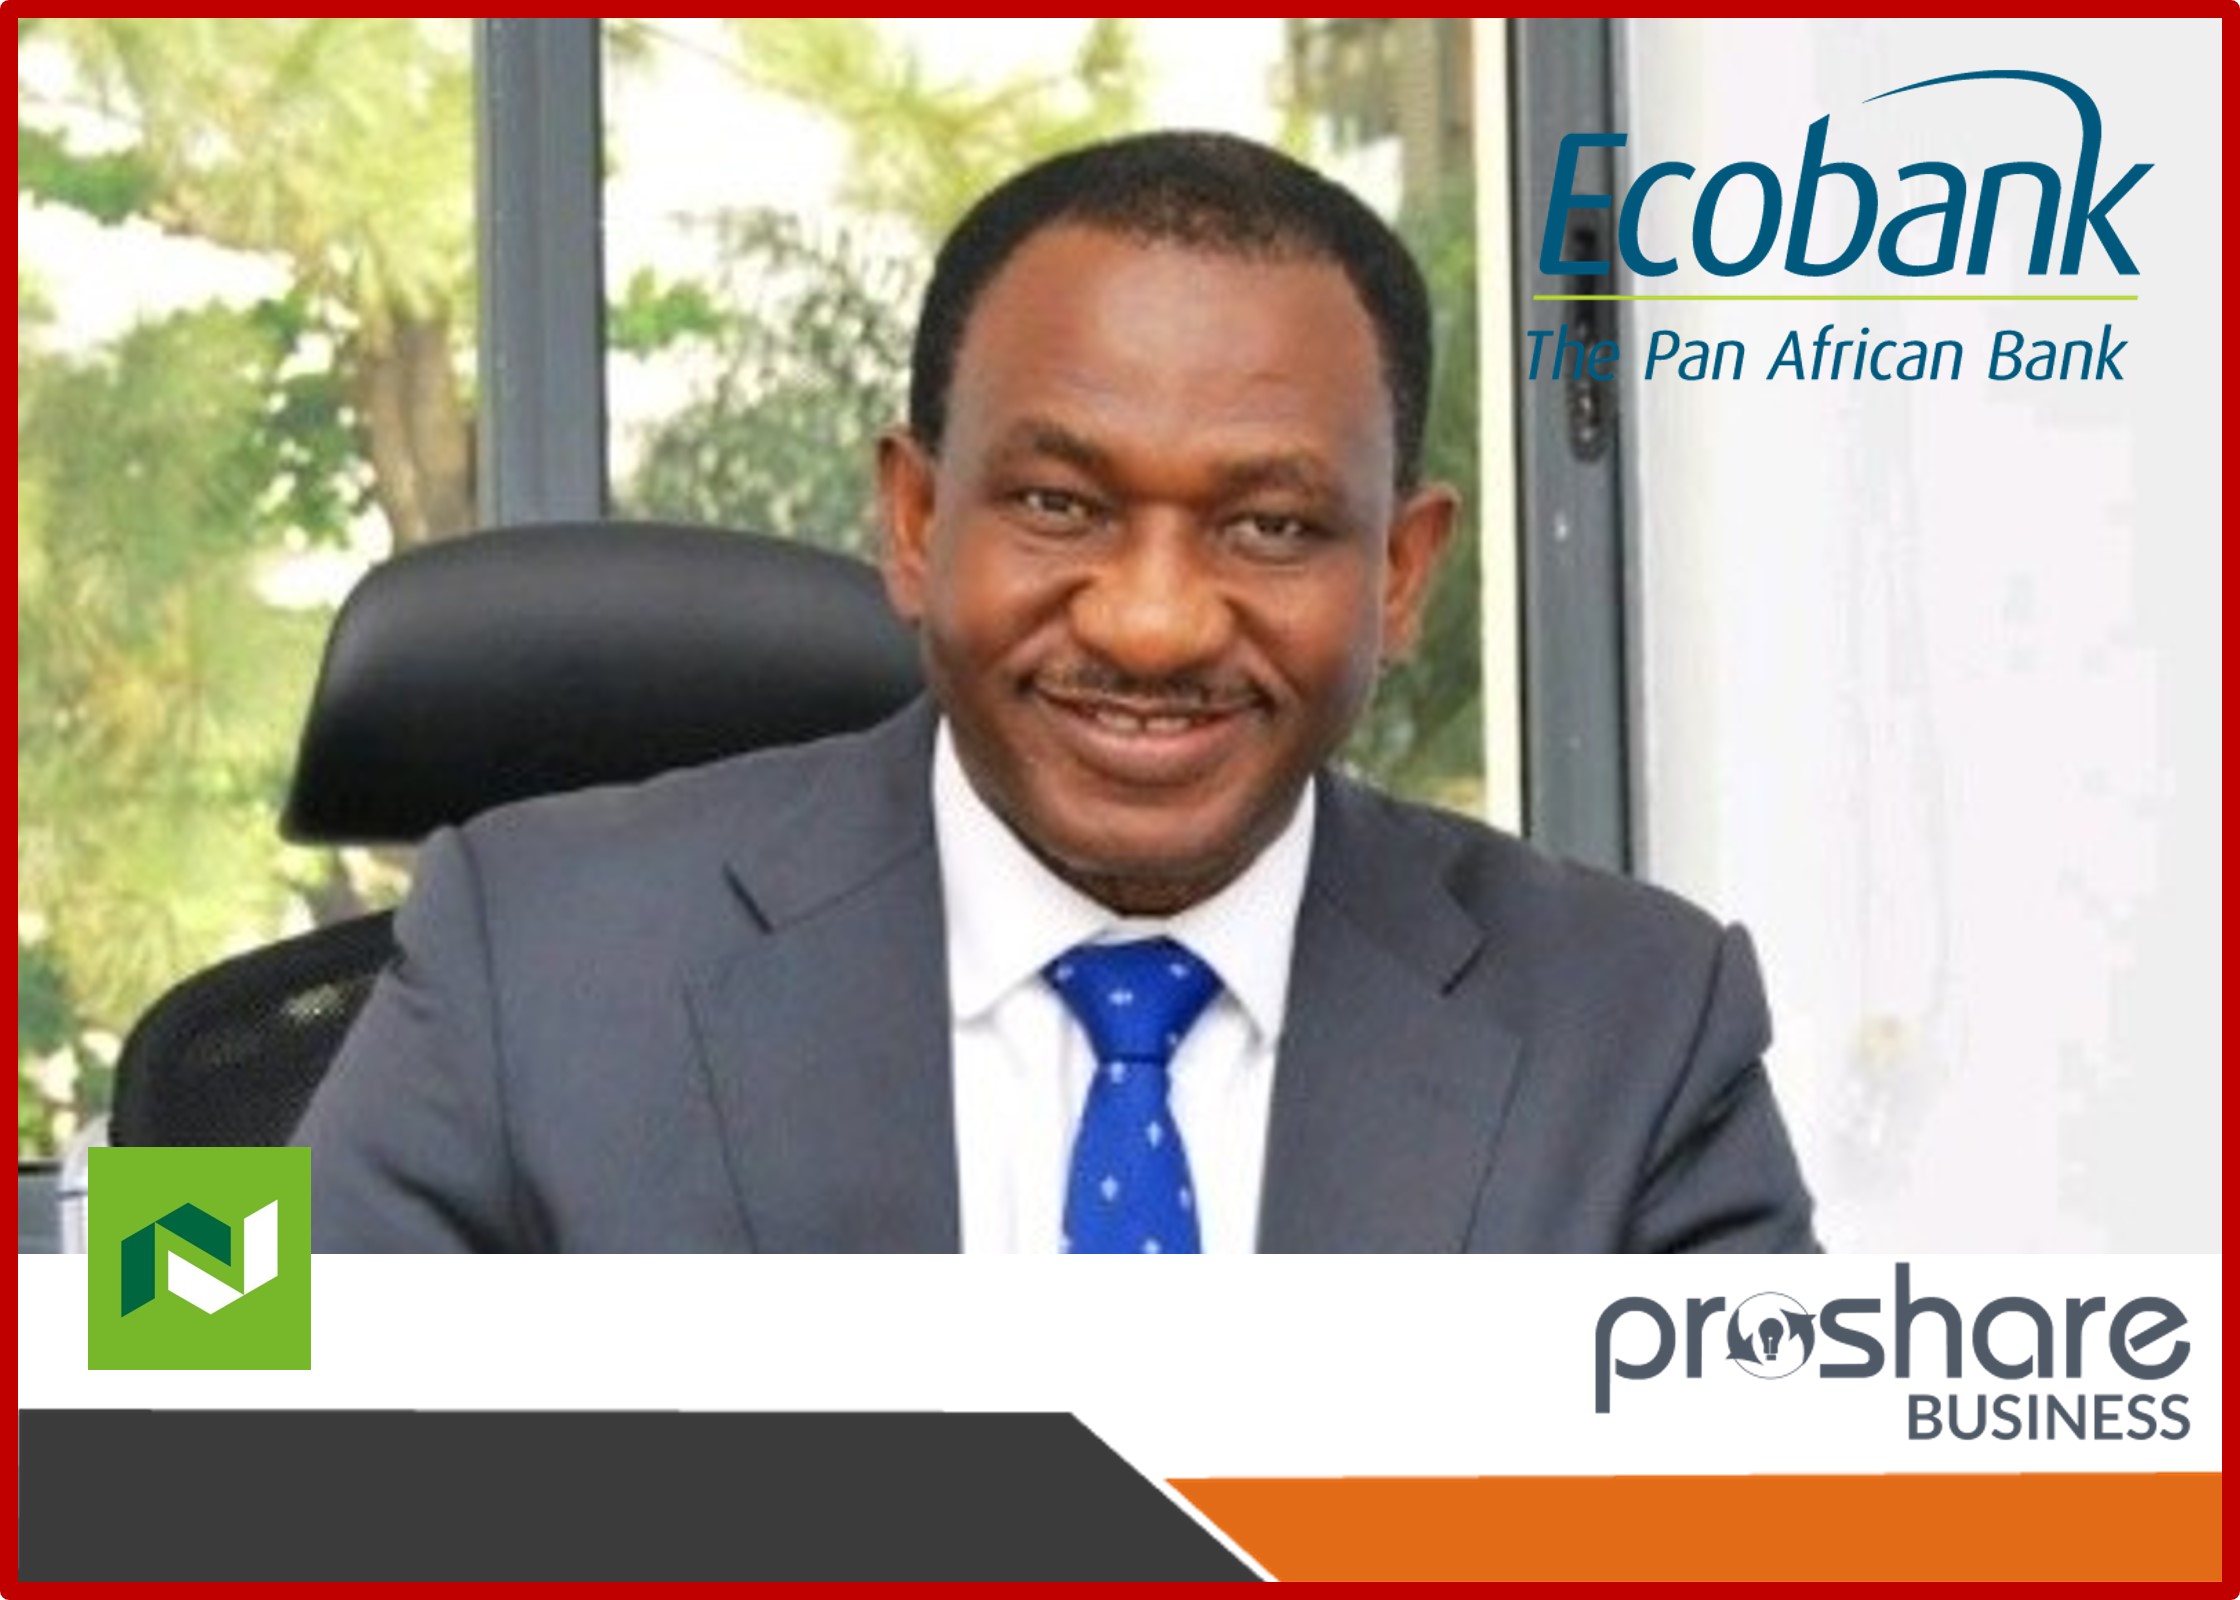 Ecobank Group Appoints Chinedu Ikwudinma as Group Chief Risk Officer